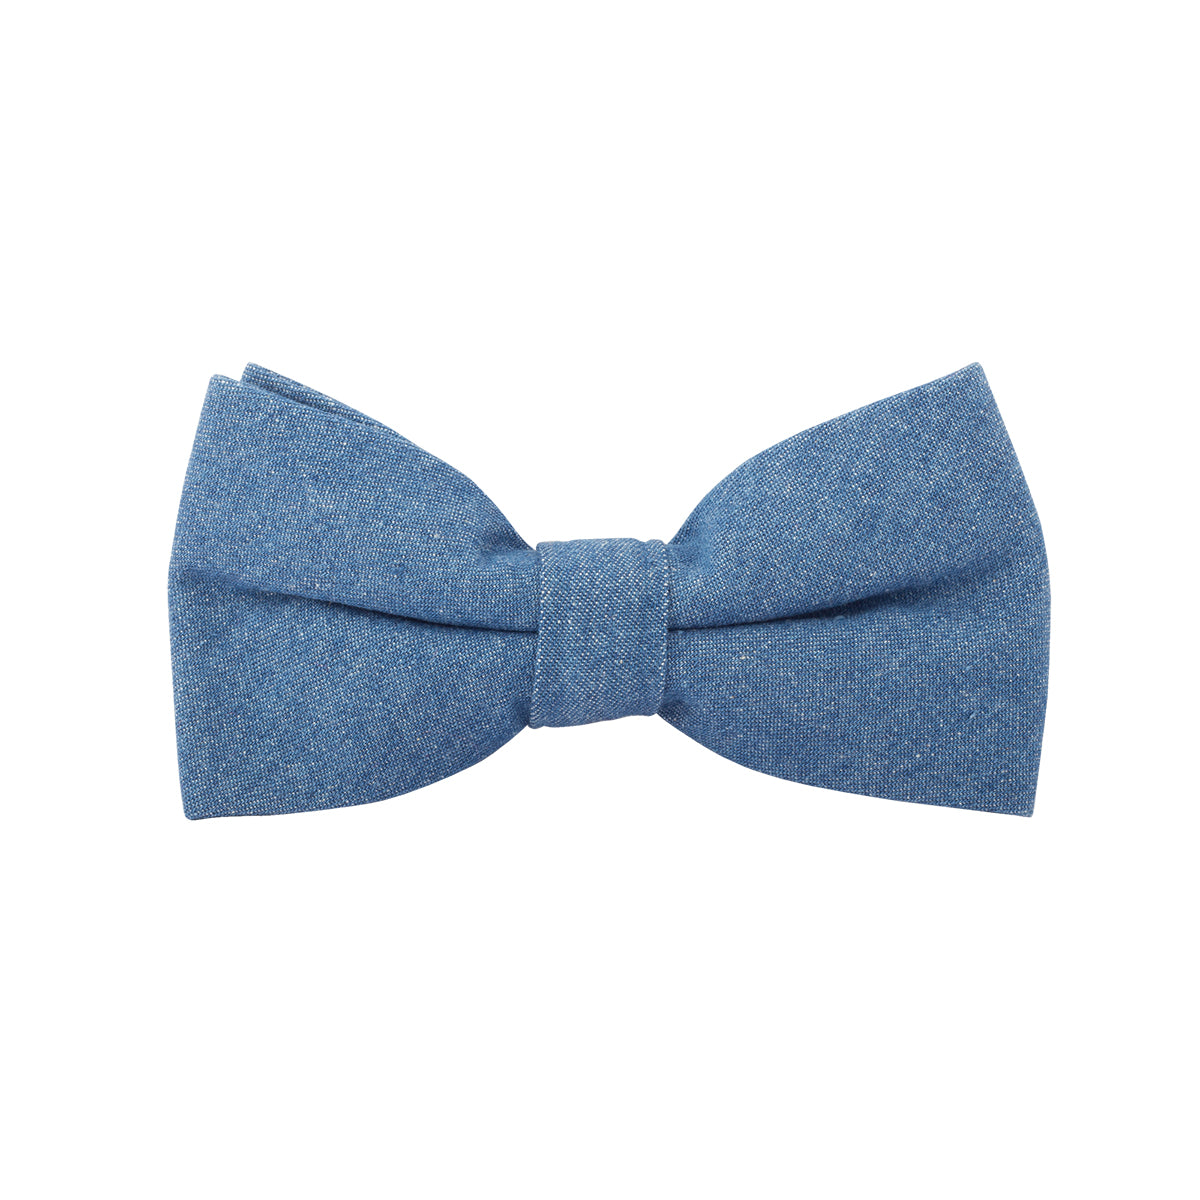 A last minute fix that lends an unmissable edge - this blue classic bow tie has an adjustable flexi strap that will fit just right.